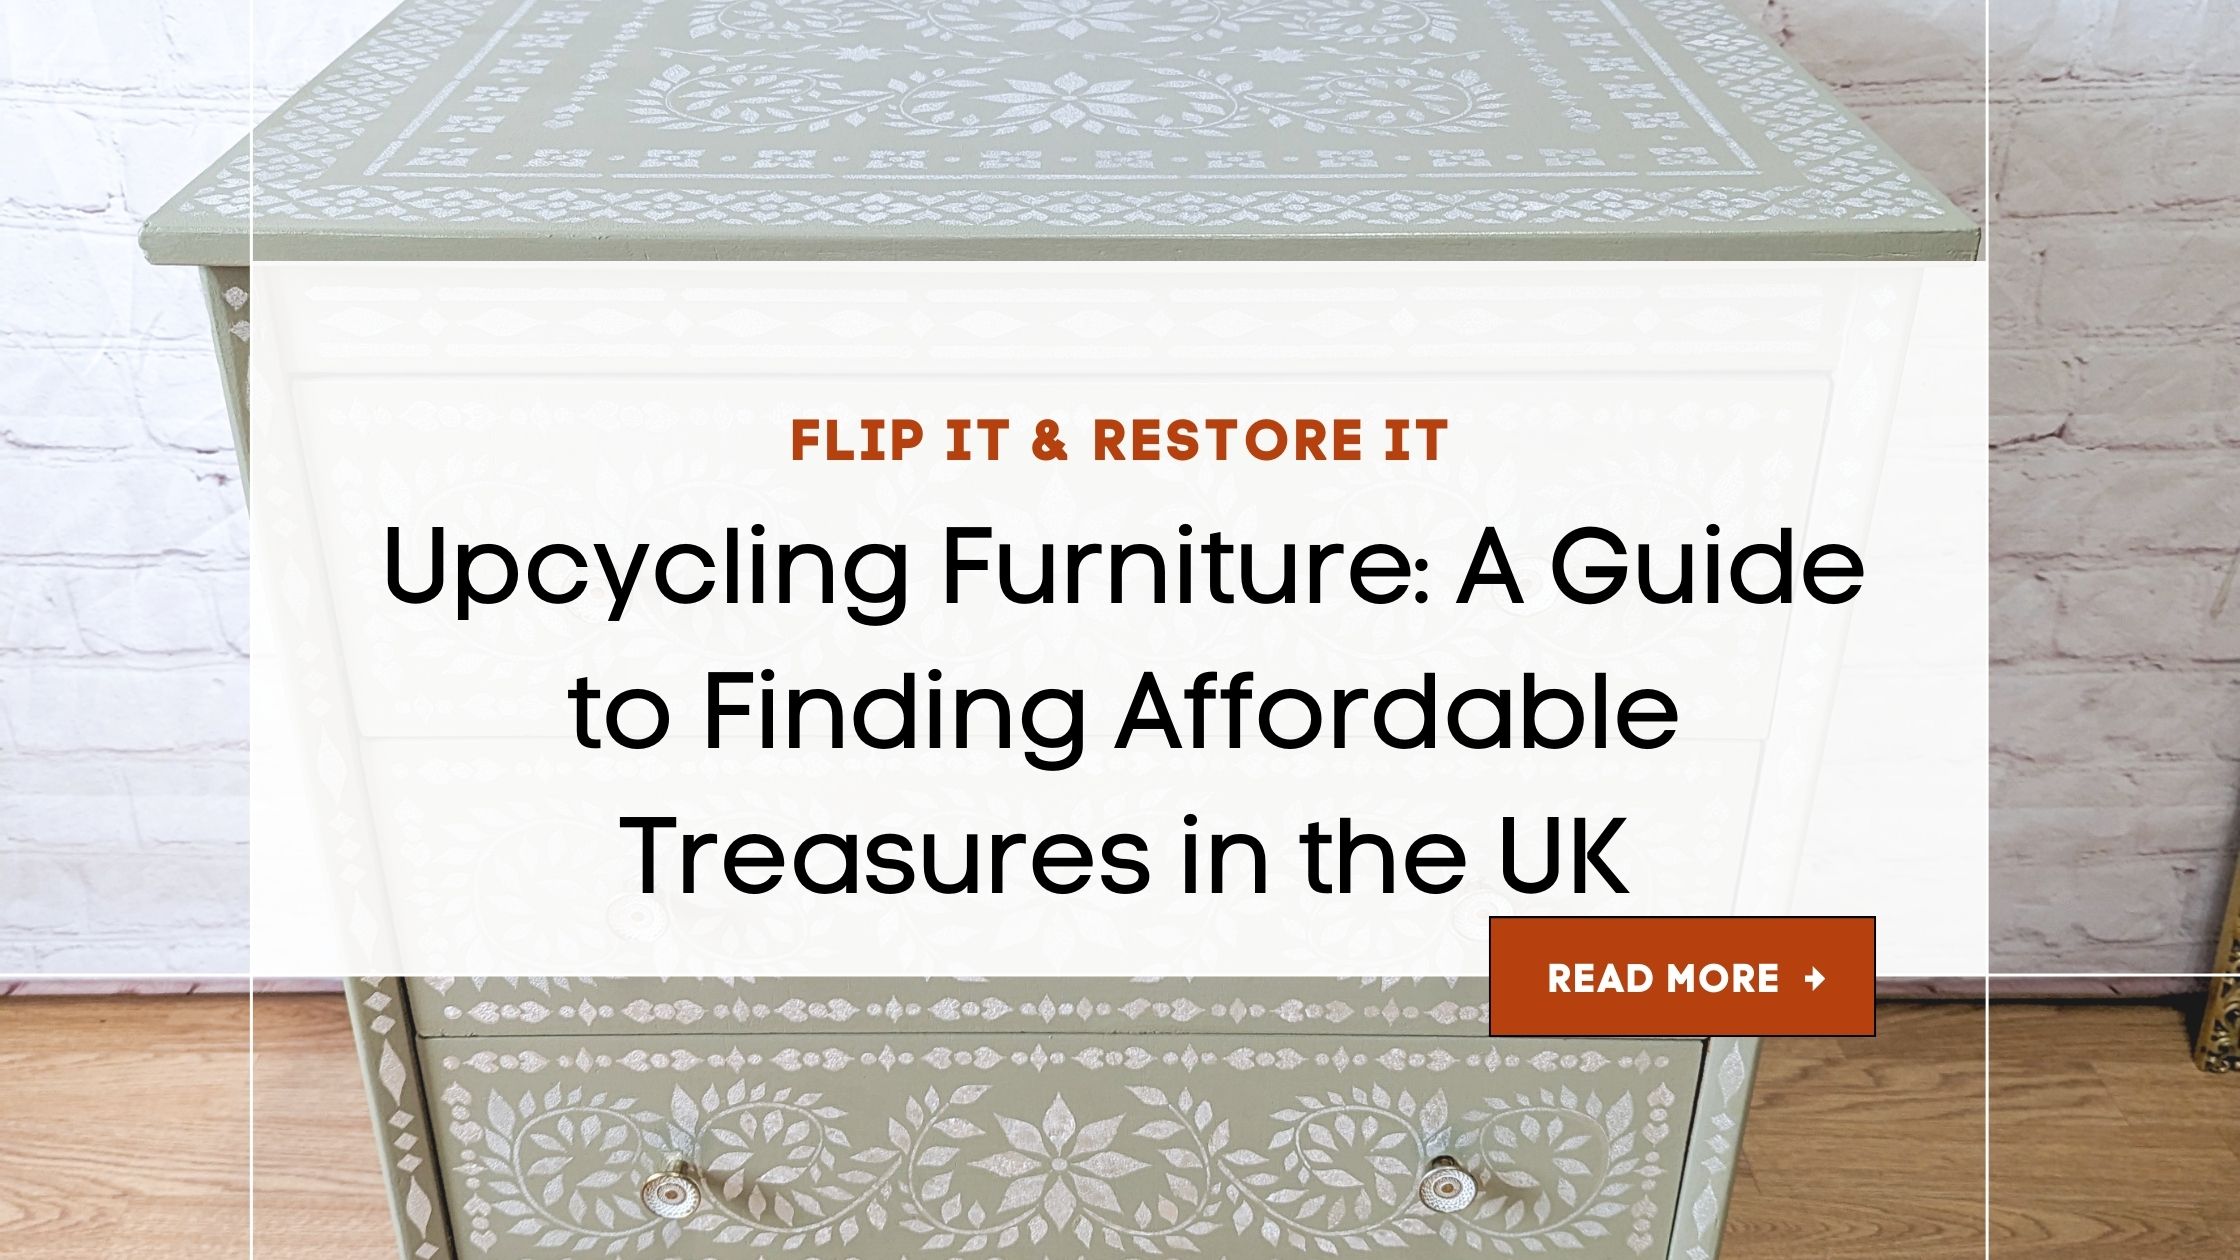 Upcycling Furniture: A Guide to Finding Affordable Treasures in the UK